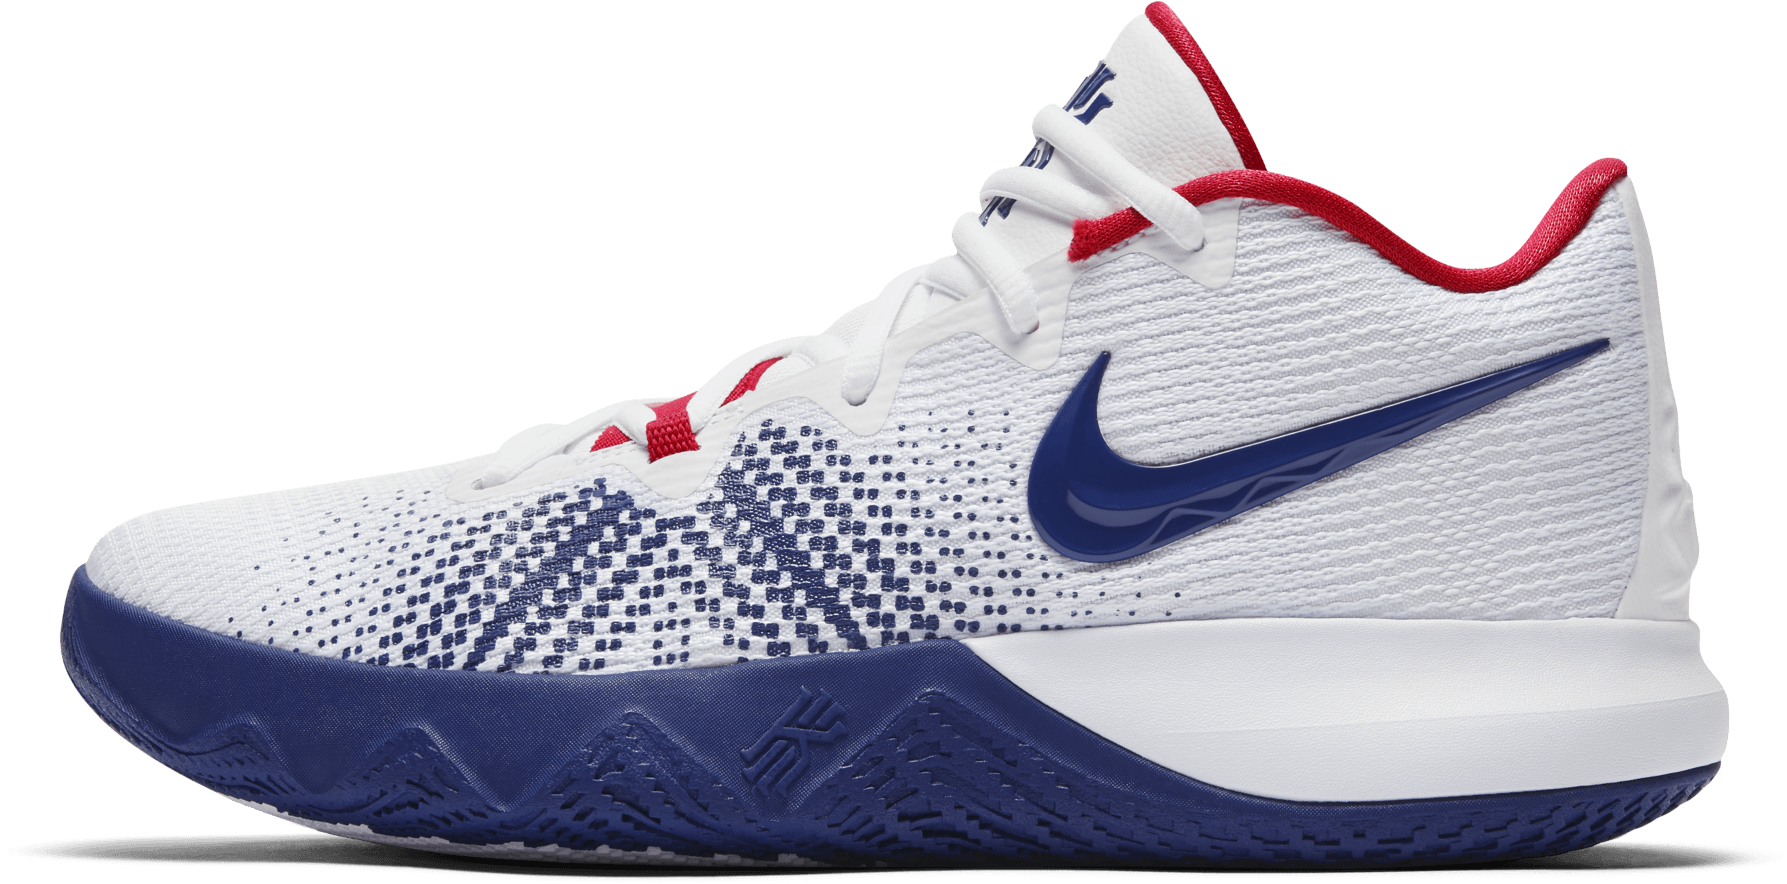 Nike Kyrie Flytrap Performance Review